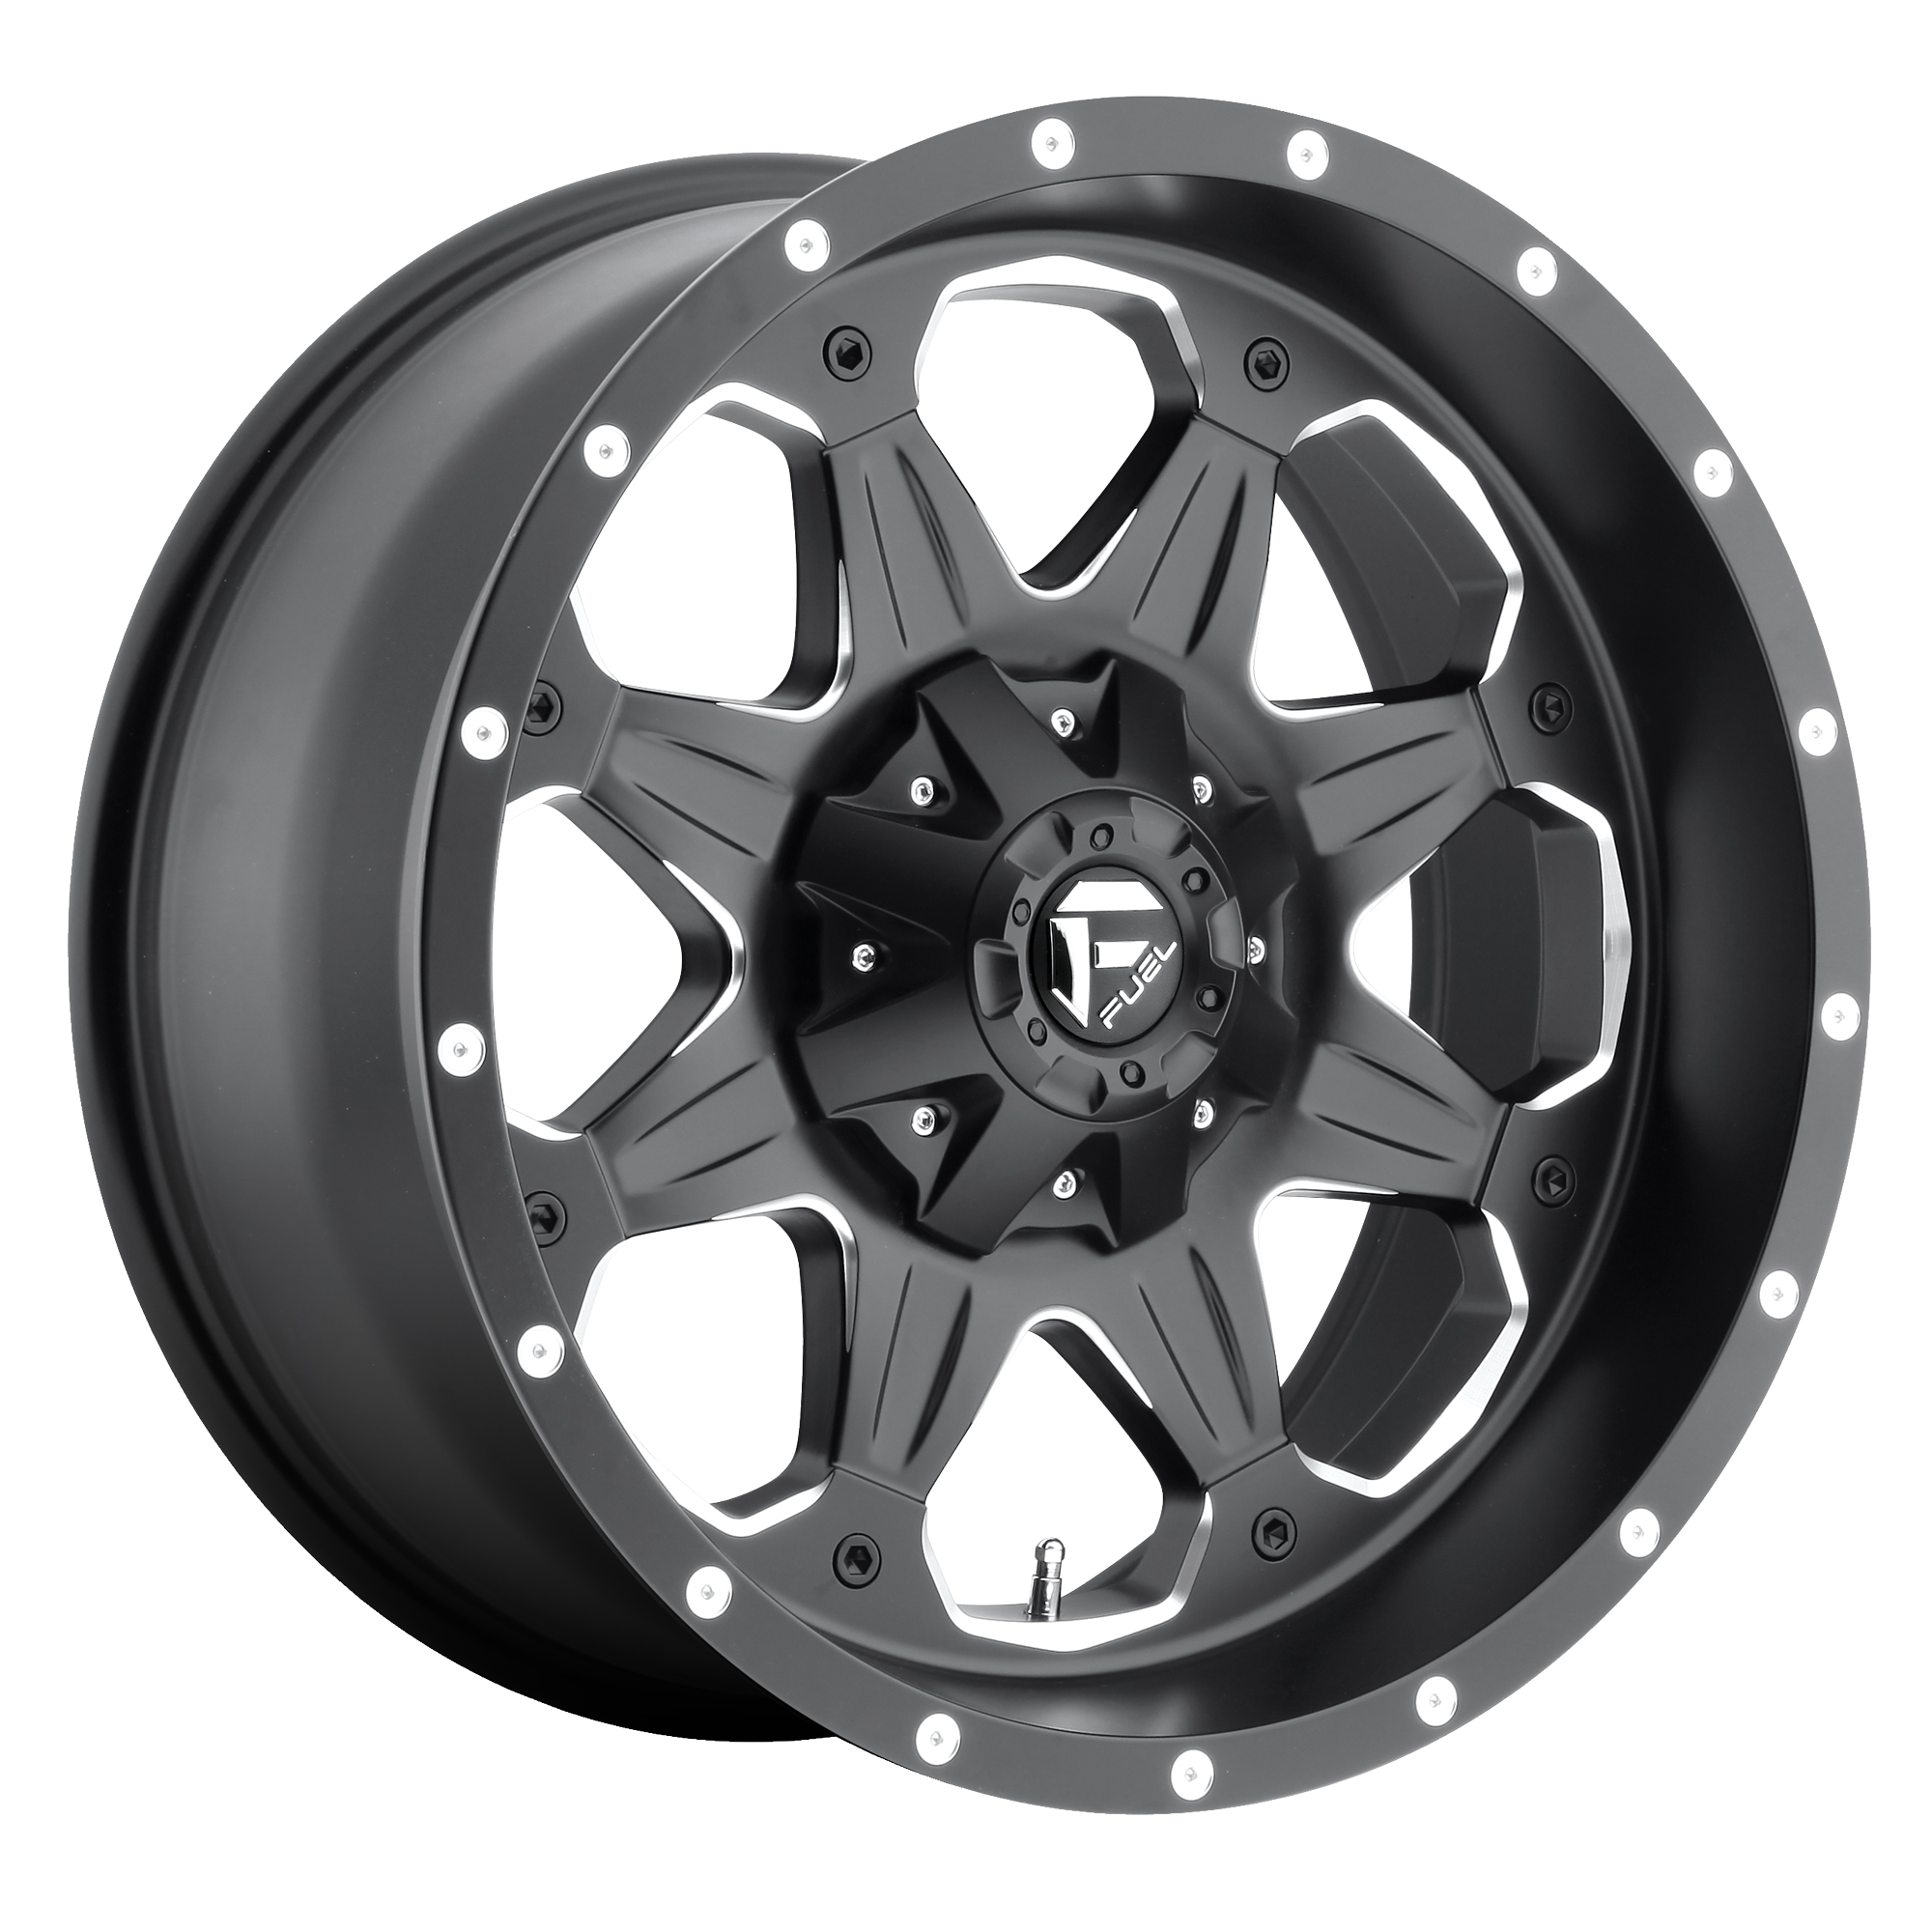 BOOST 16x8 5x139.70 MATTE BLACK MILLED (1 mm) - Tires and Engine Performance